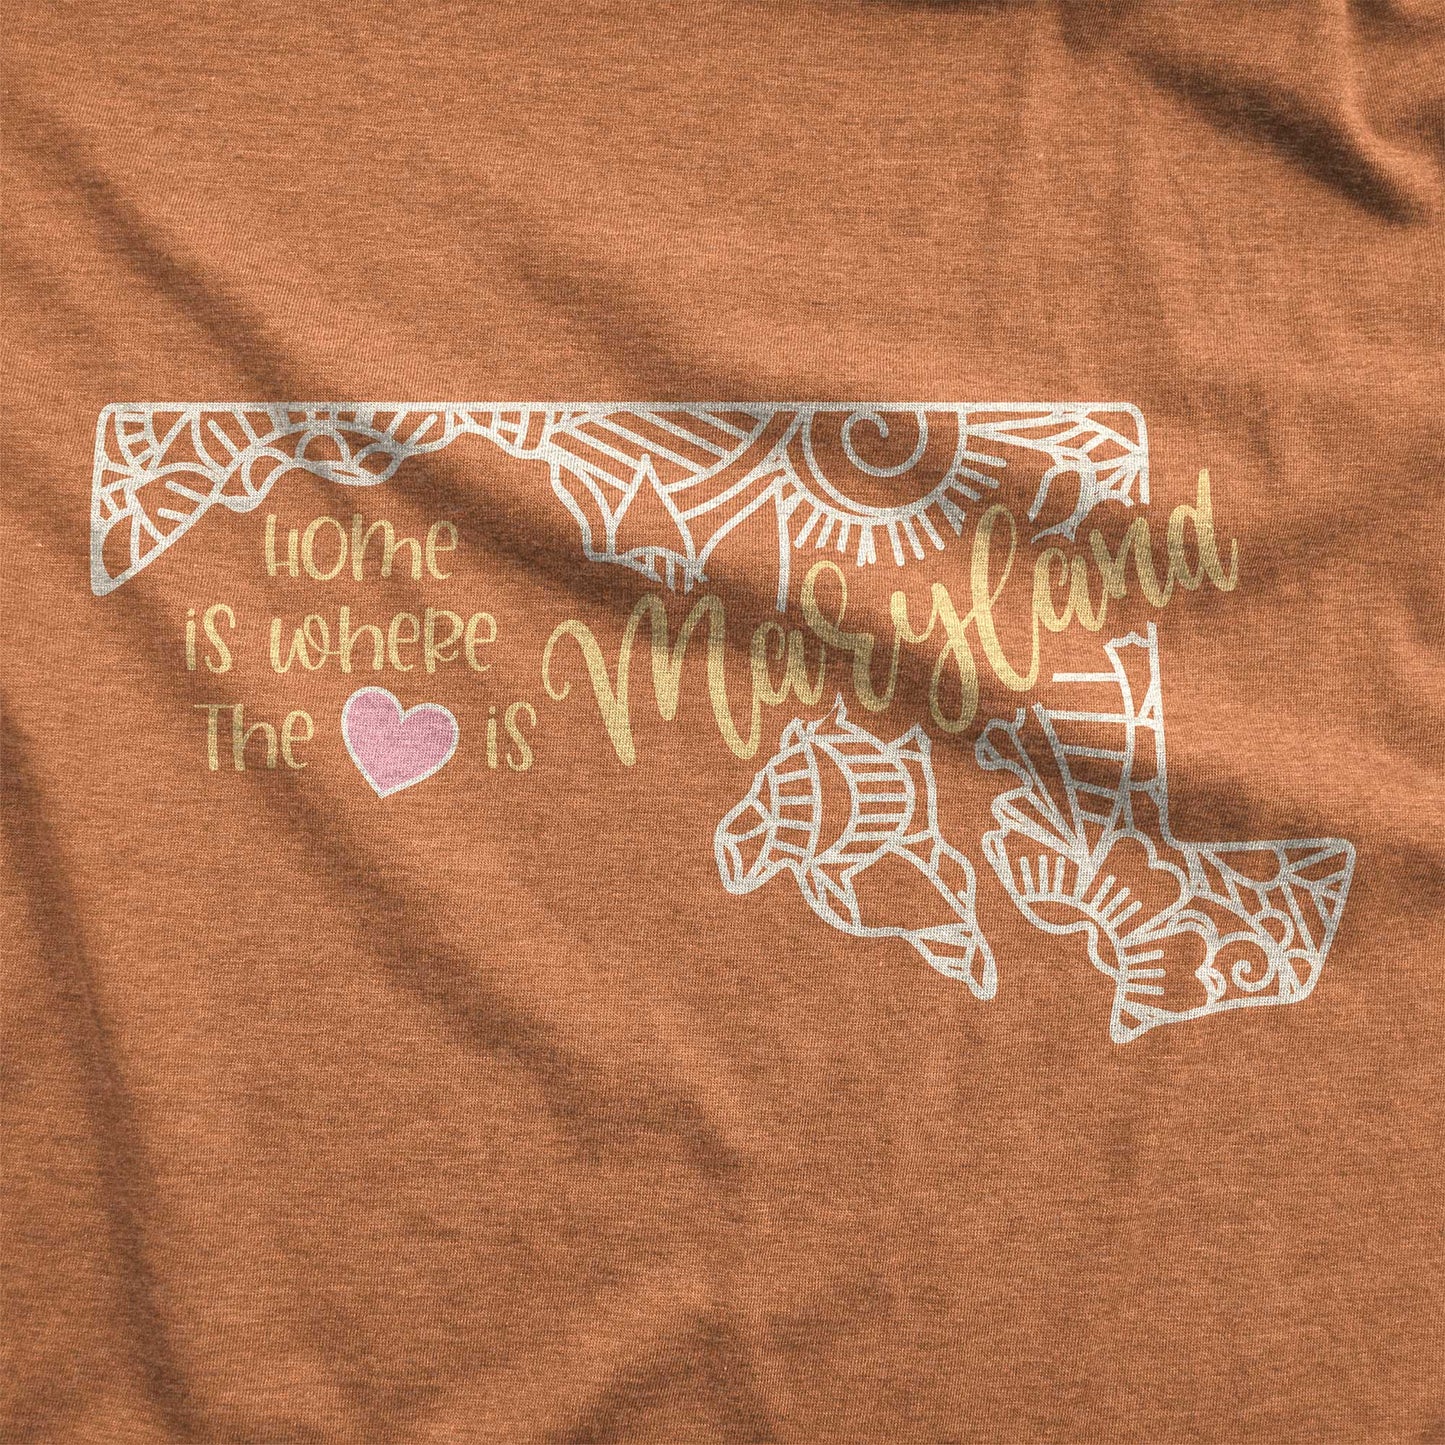 Maryland: Home is Where the Heart Is - Adult Unisex Jersey Crew Tee